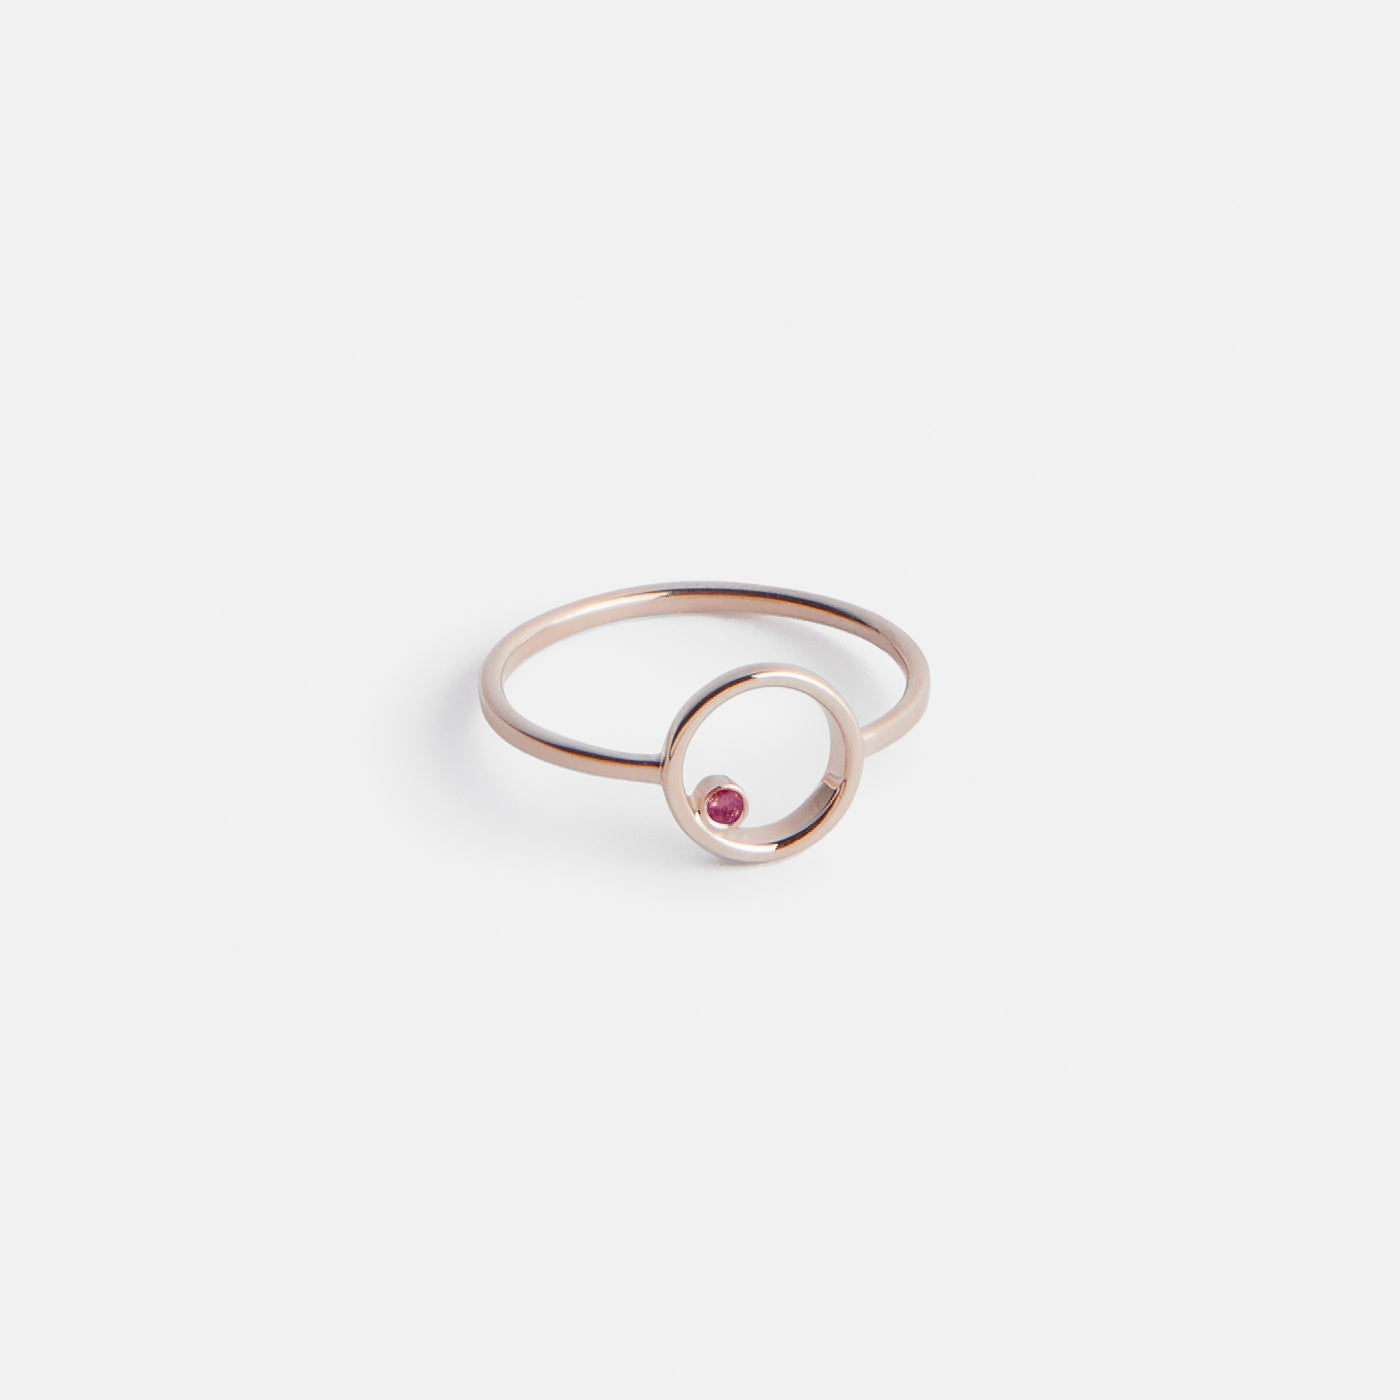 Ila Delicate Ring in 14k Rose Gold set with Ruby by SHW Fine Jewelry NYC